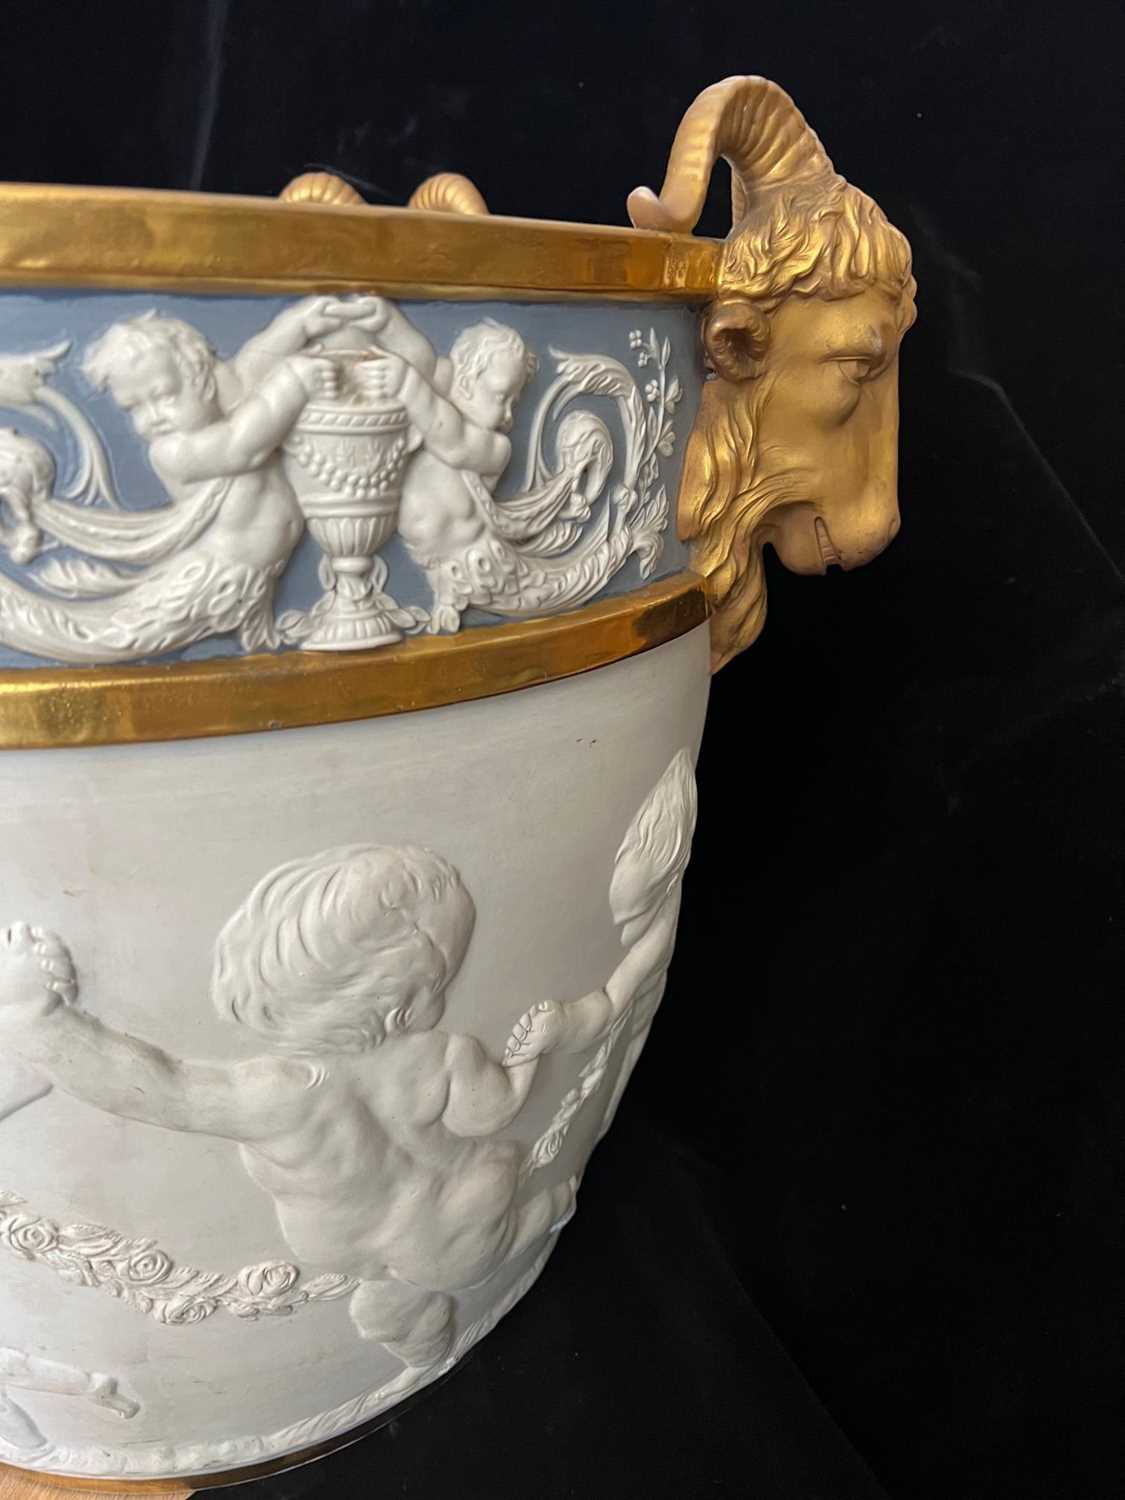 A LARGE 19TH CENTURY NEO-CLASSICAL STYLE BISQUE PORCELAIN AND PARCEL GILT JARDINIERE - Image 3 of 9